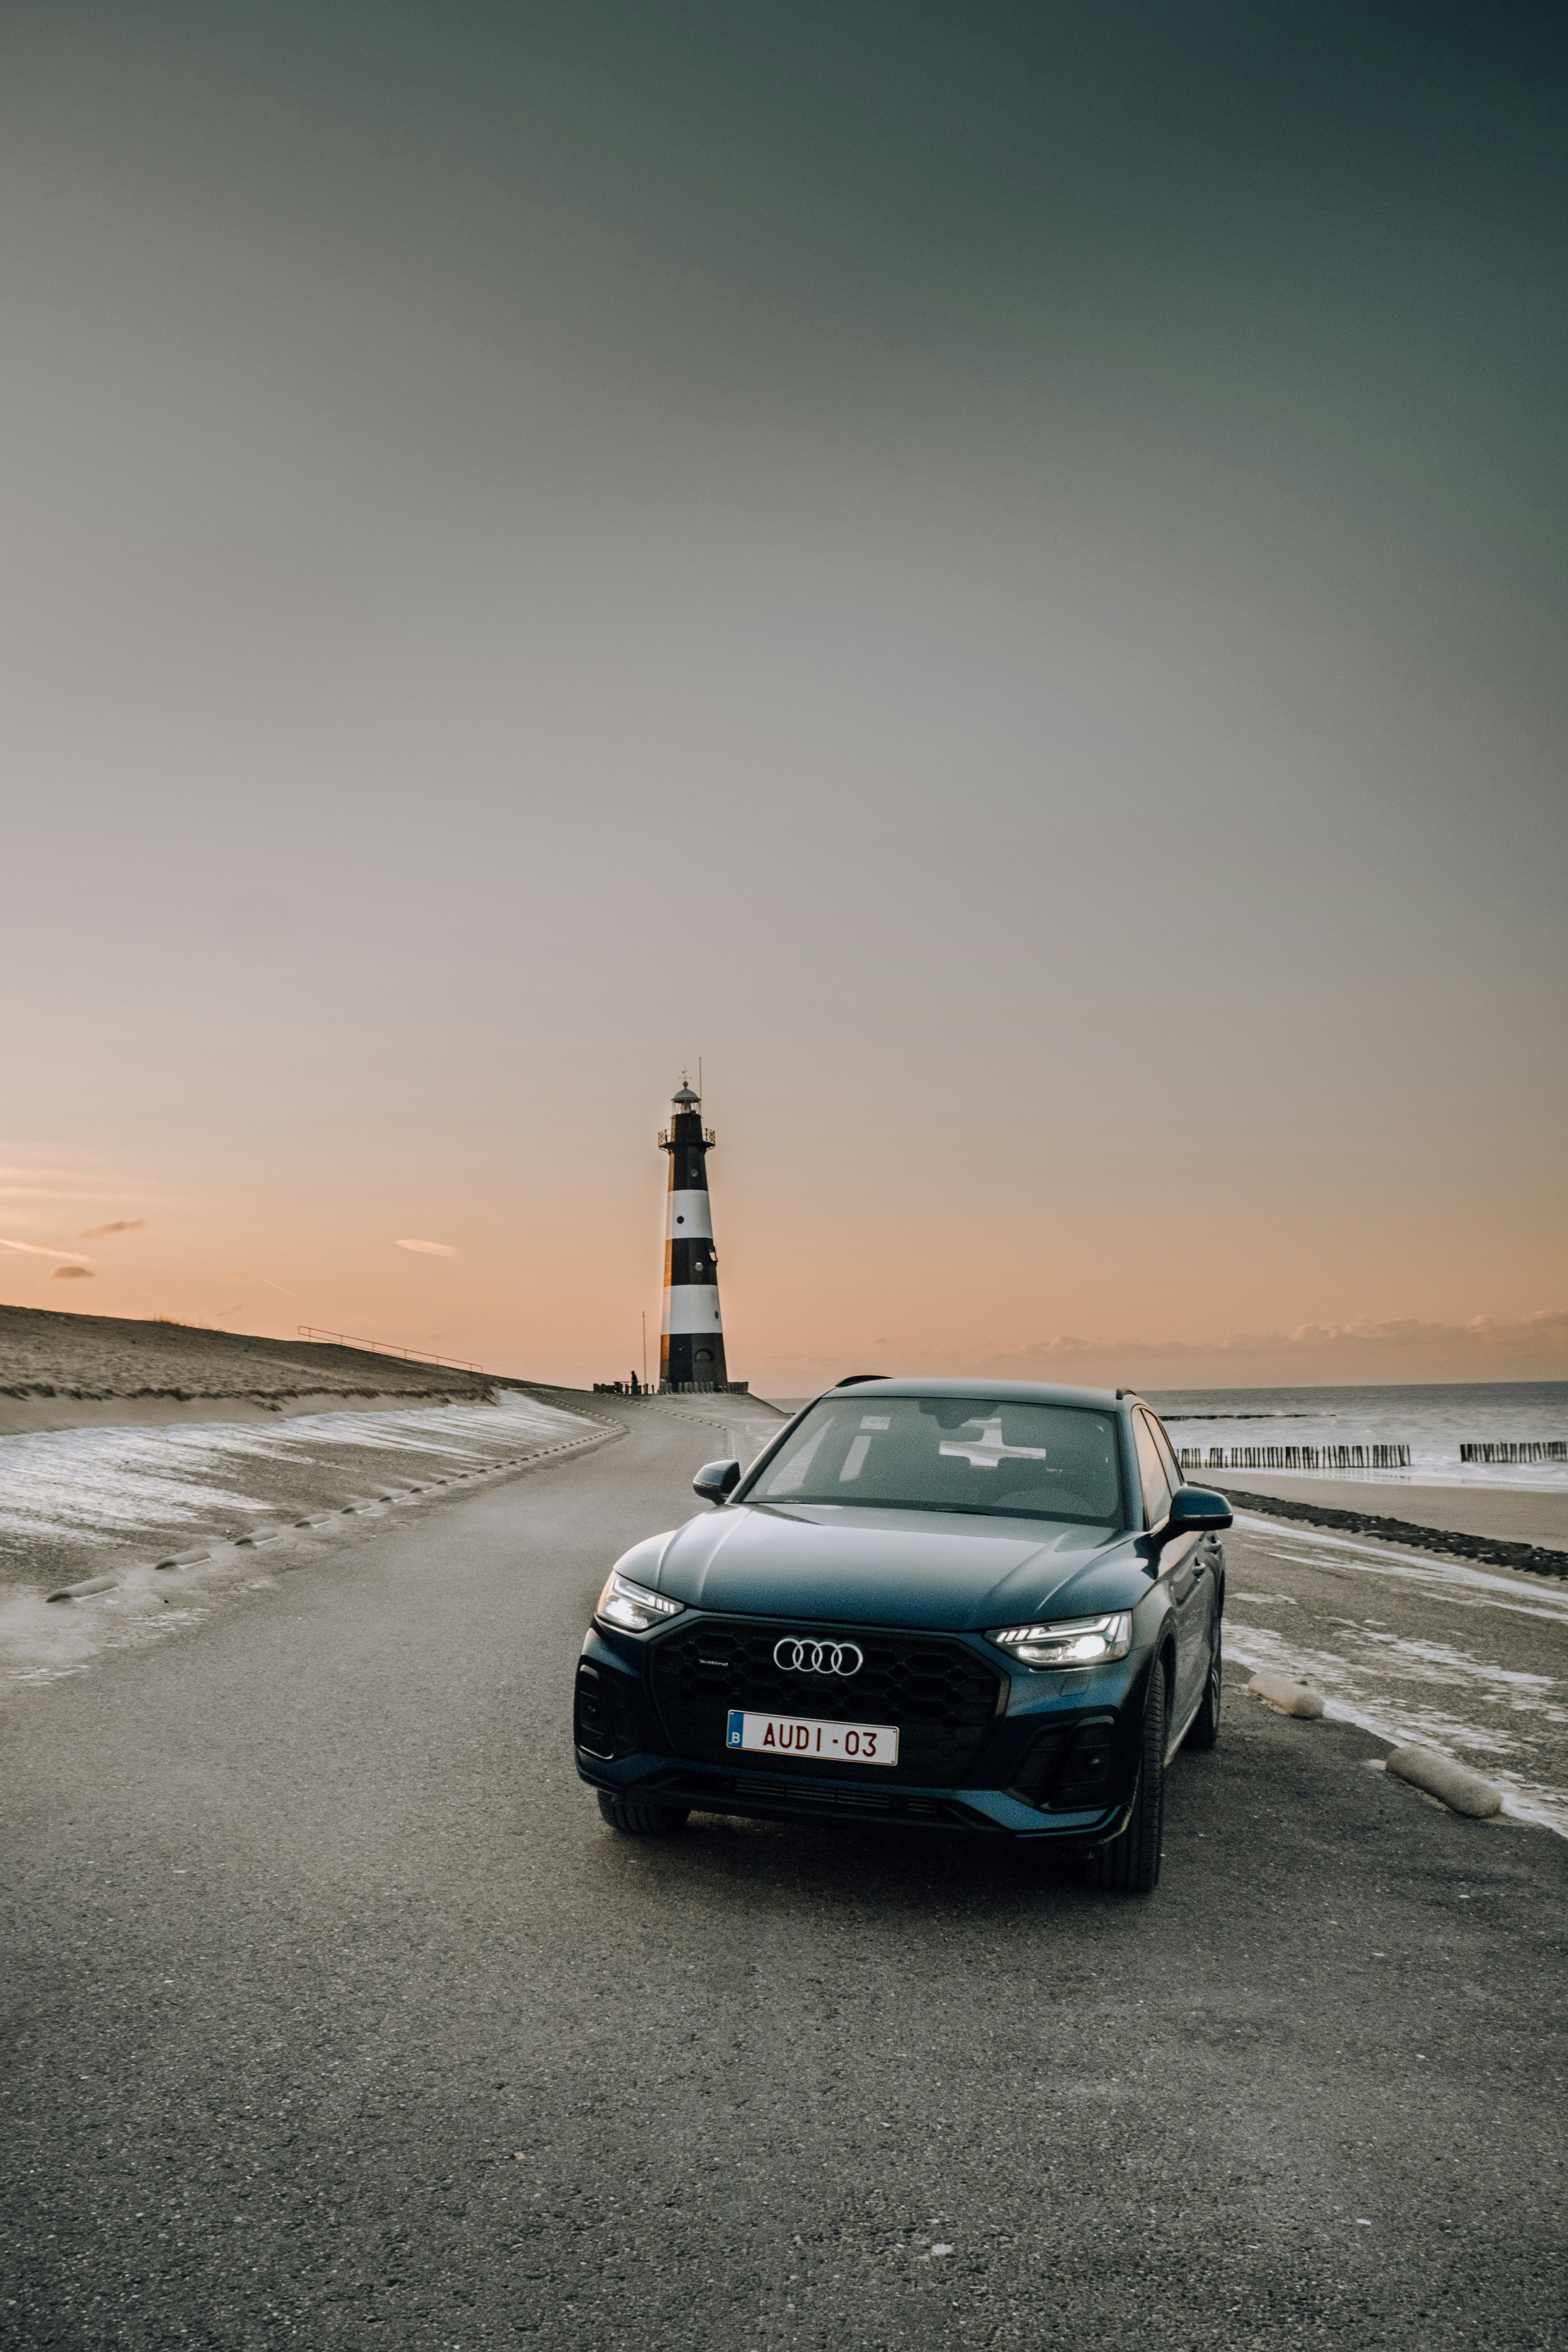 Witnessing sunset with the Audi Q5 Follow me on Instagram ( @Kenny.leys ) for more of my adventures!